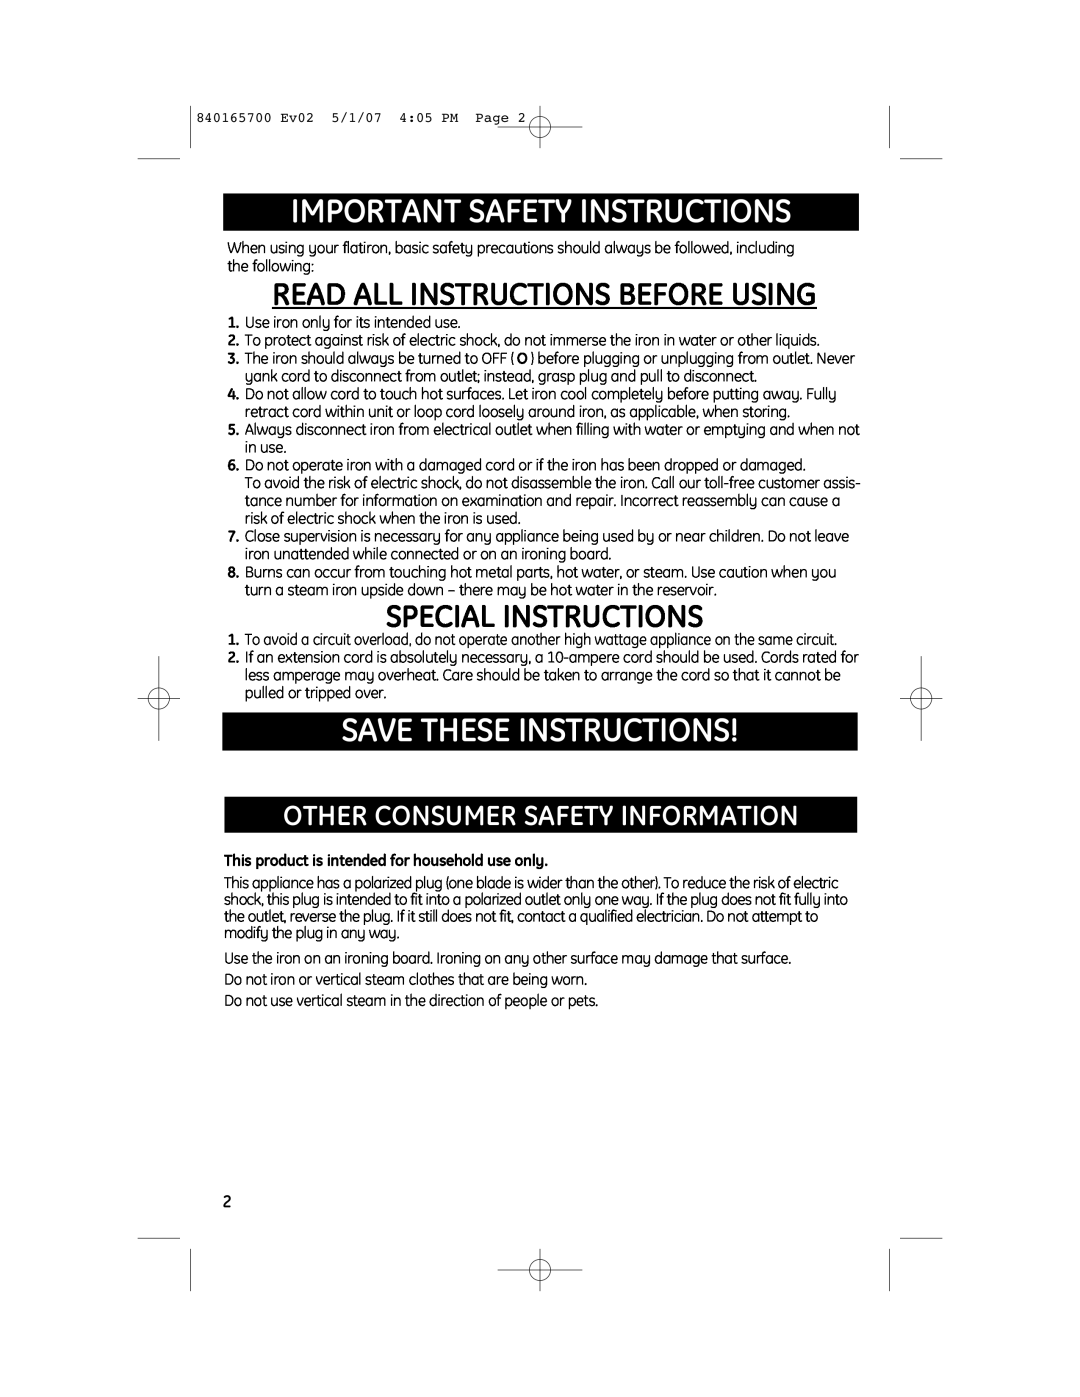 GE 169159 Other Consumer Safety Information, Important Safety Instructions, Save These Instructions, Special Instructions 